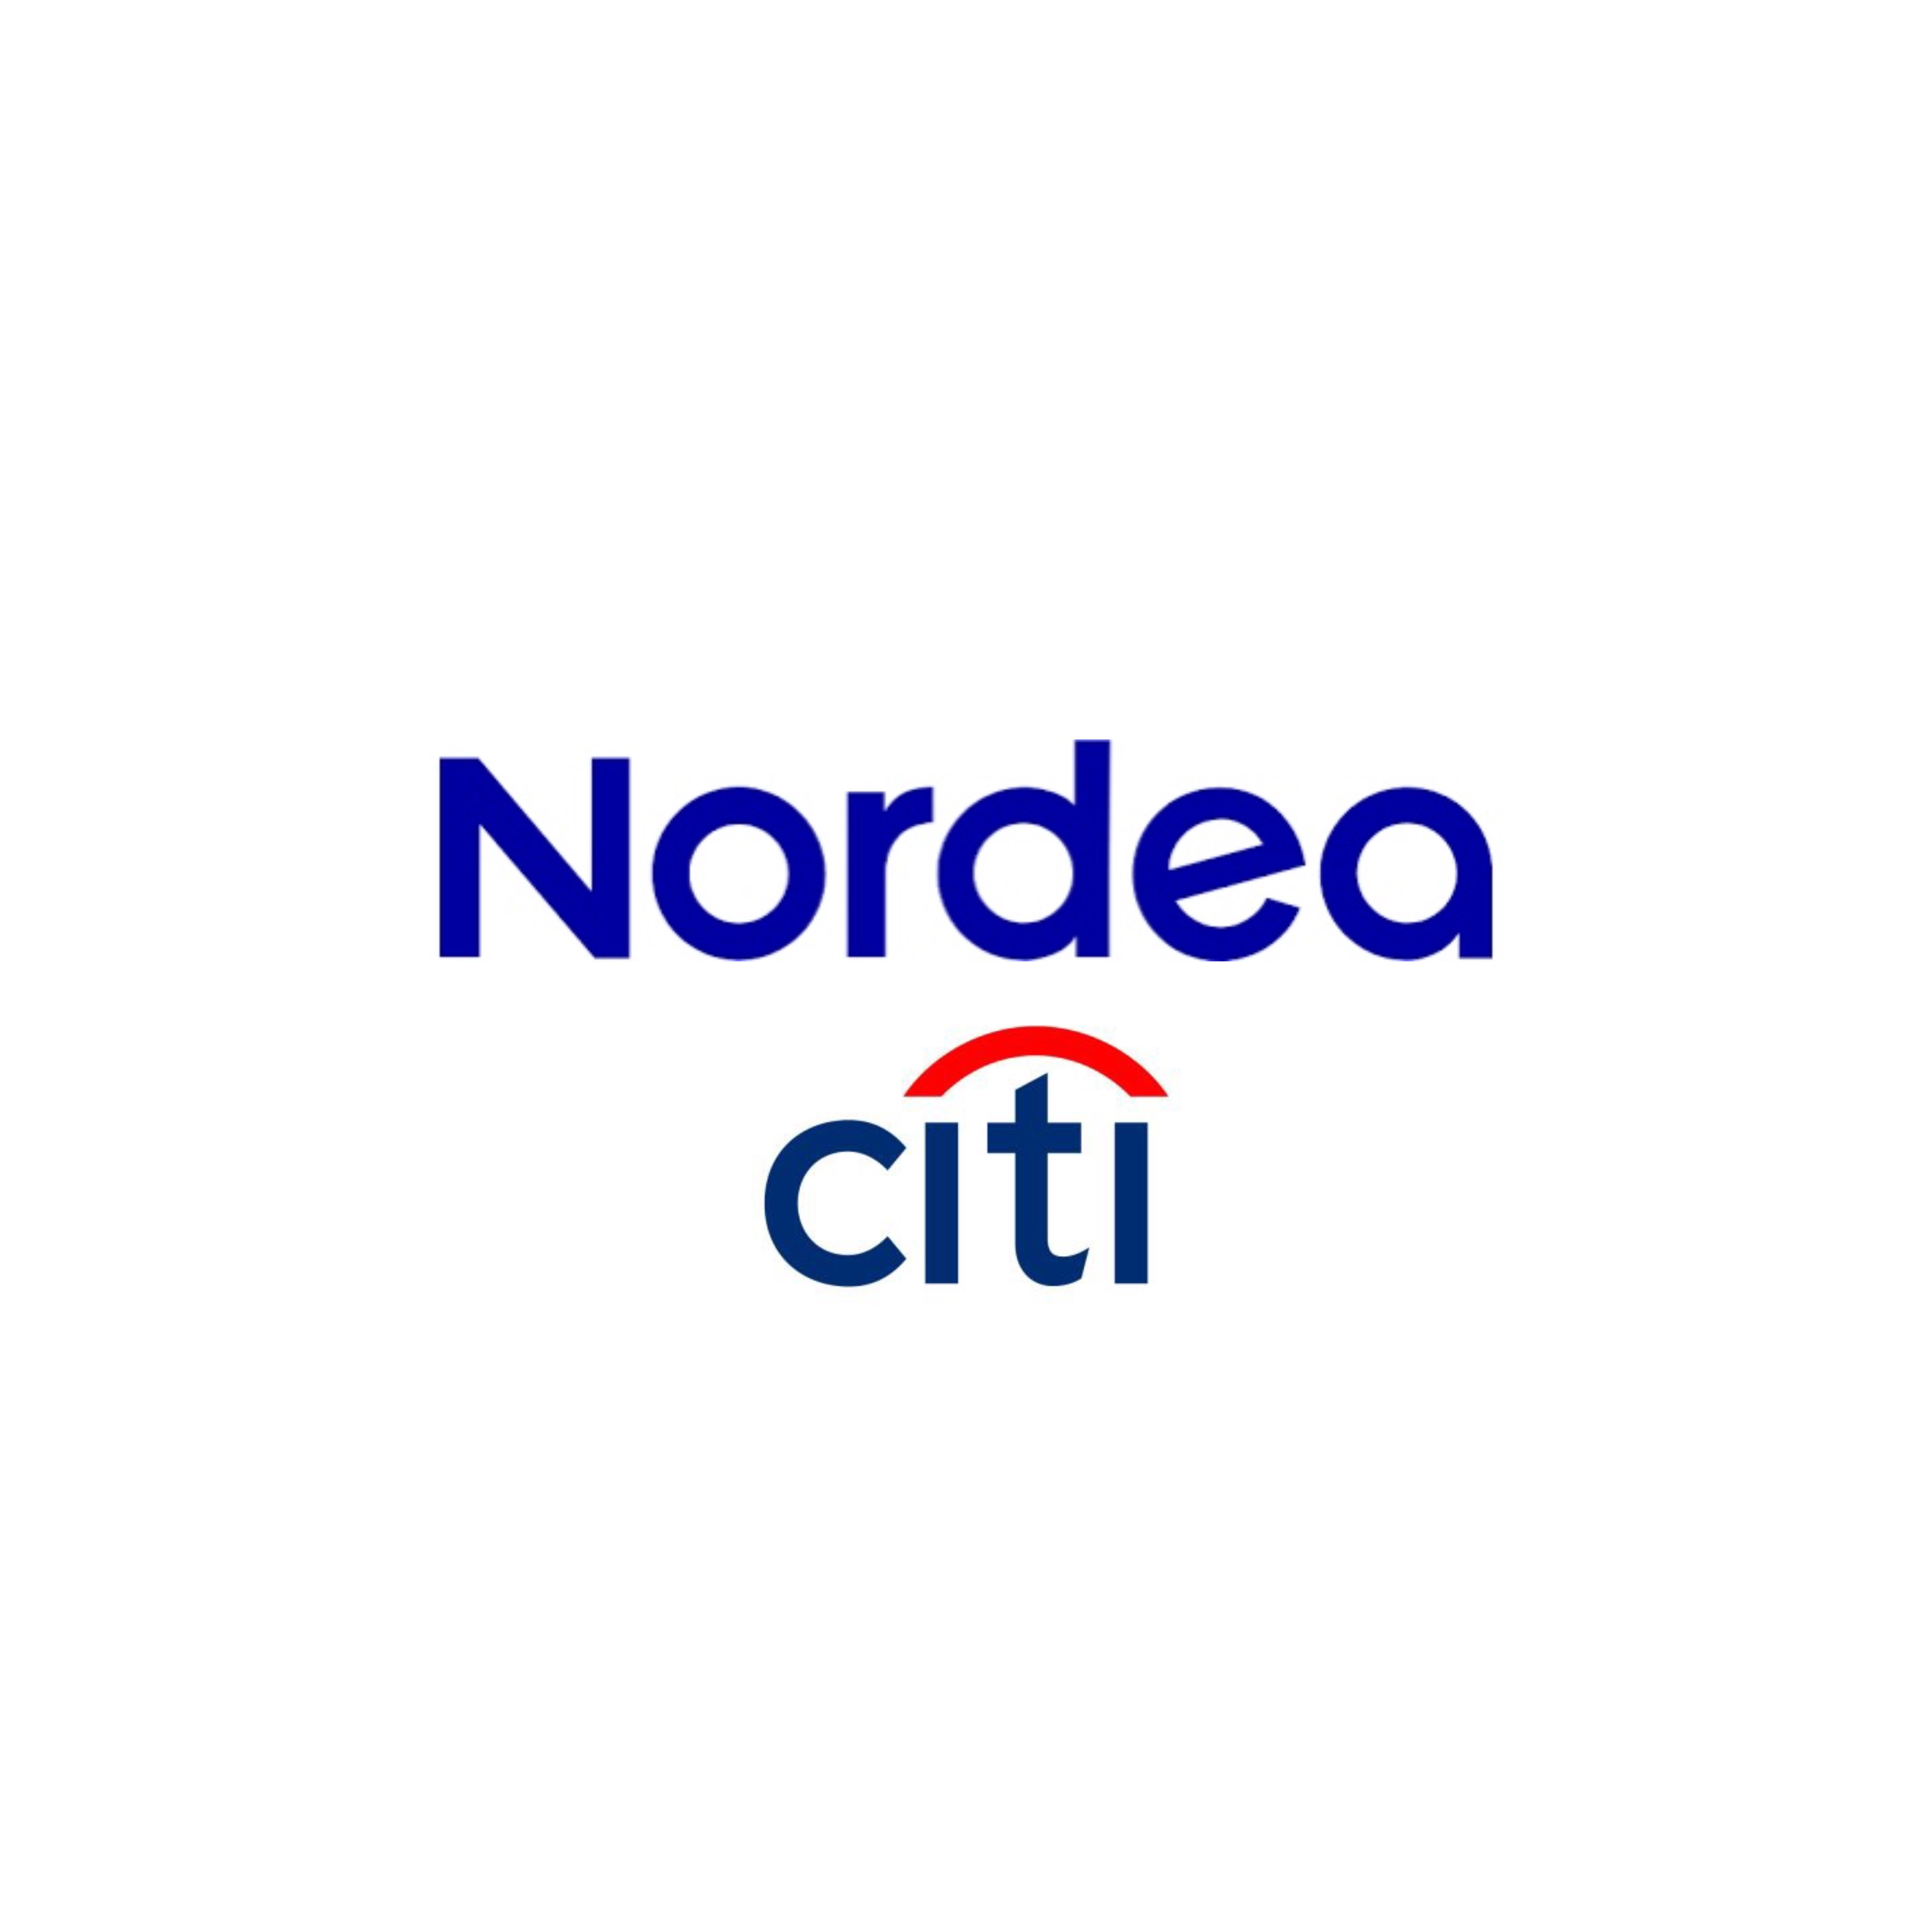 Nordea Enters Into Referral Agreement With Citi for Sub-Custody Services